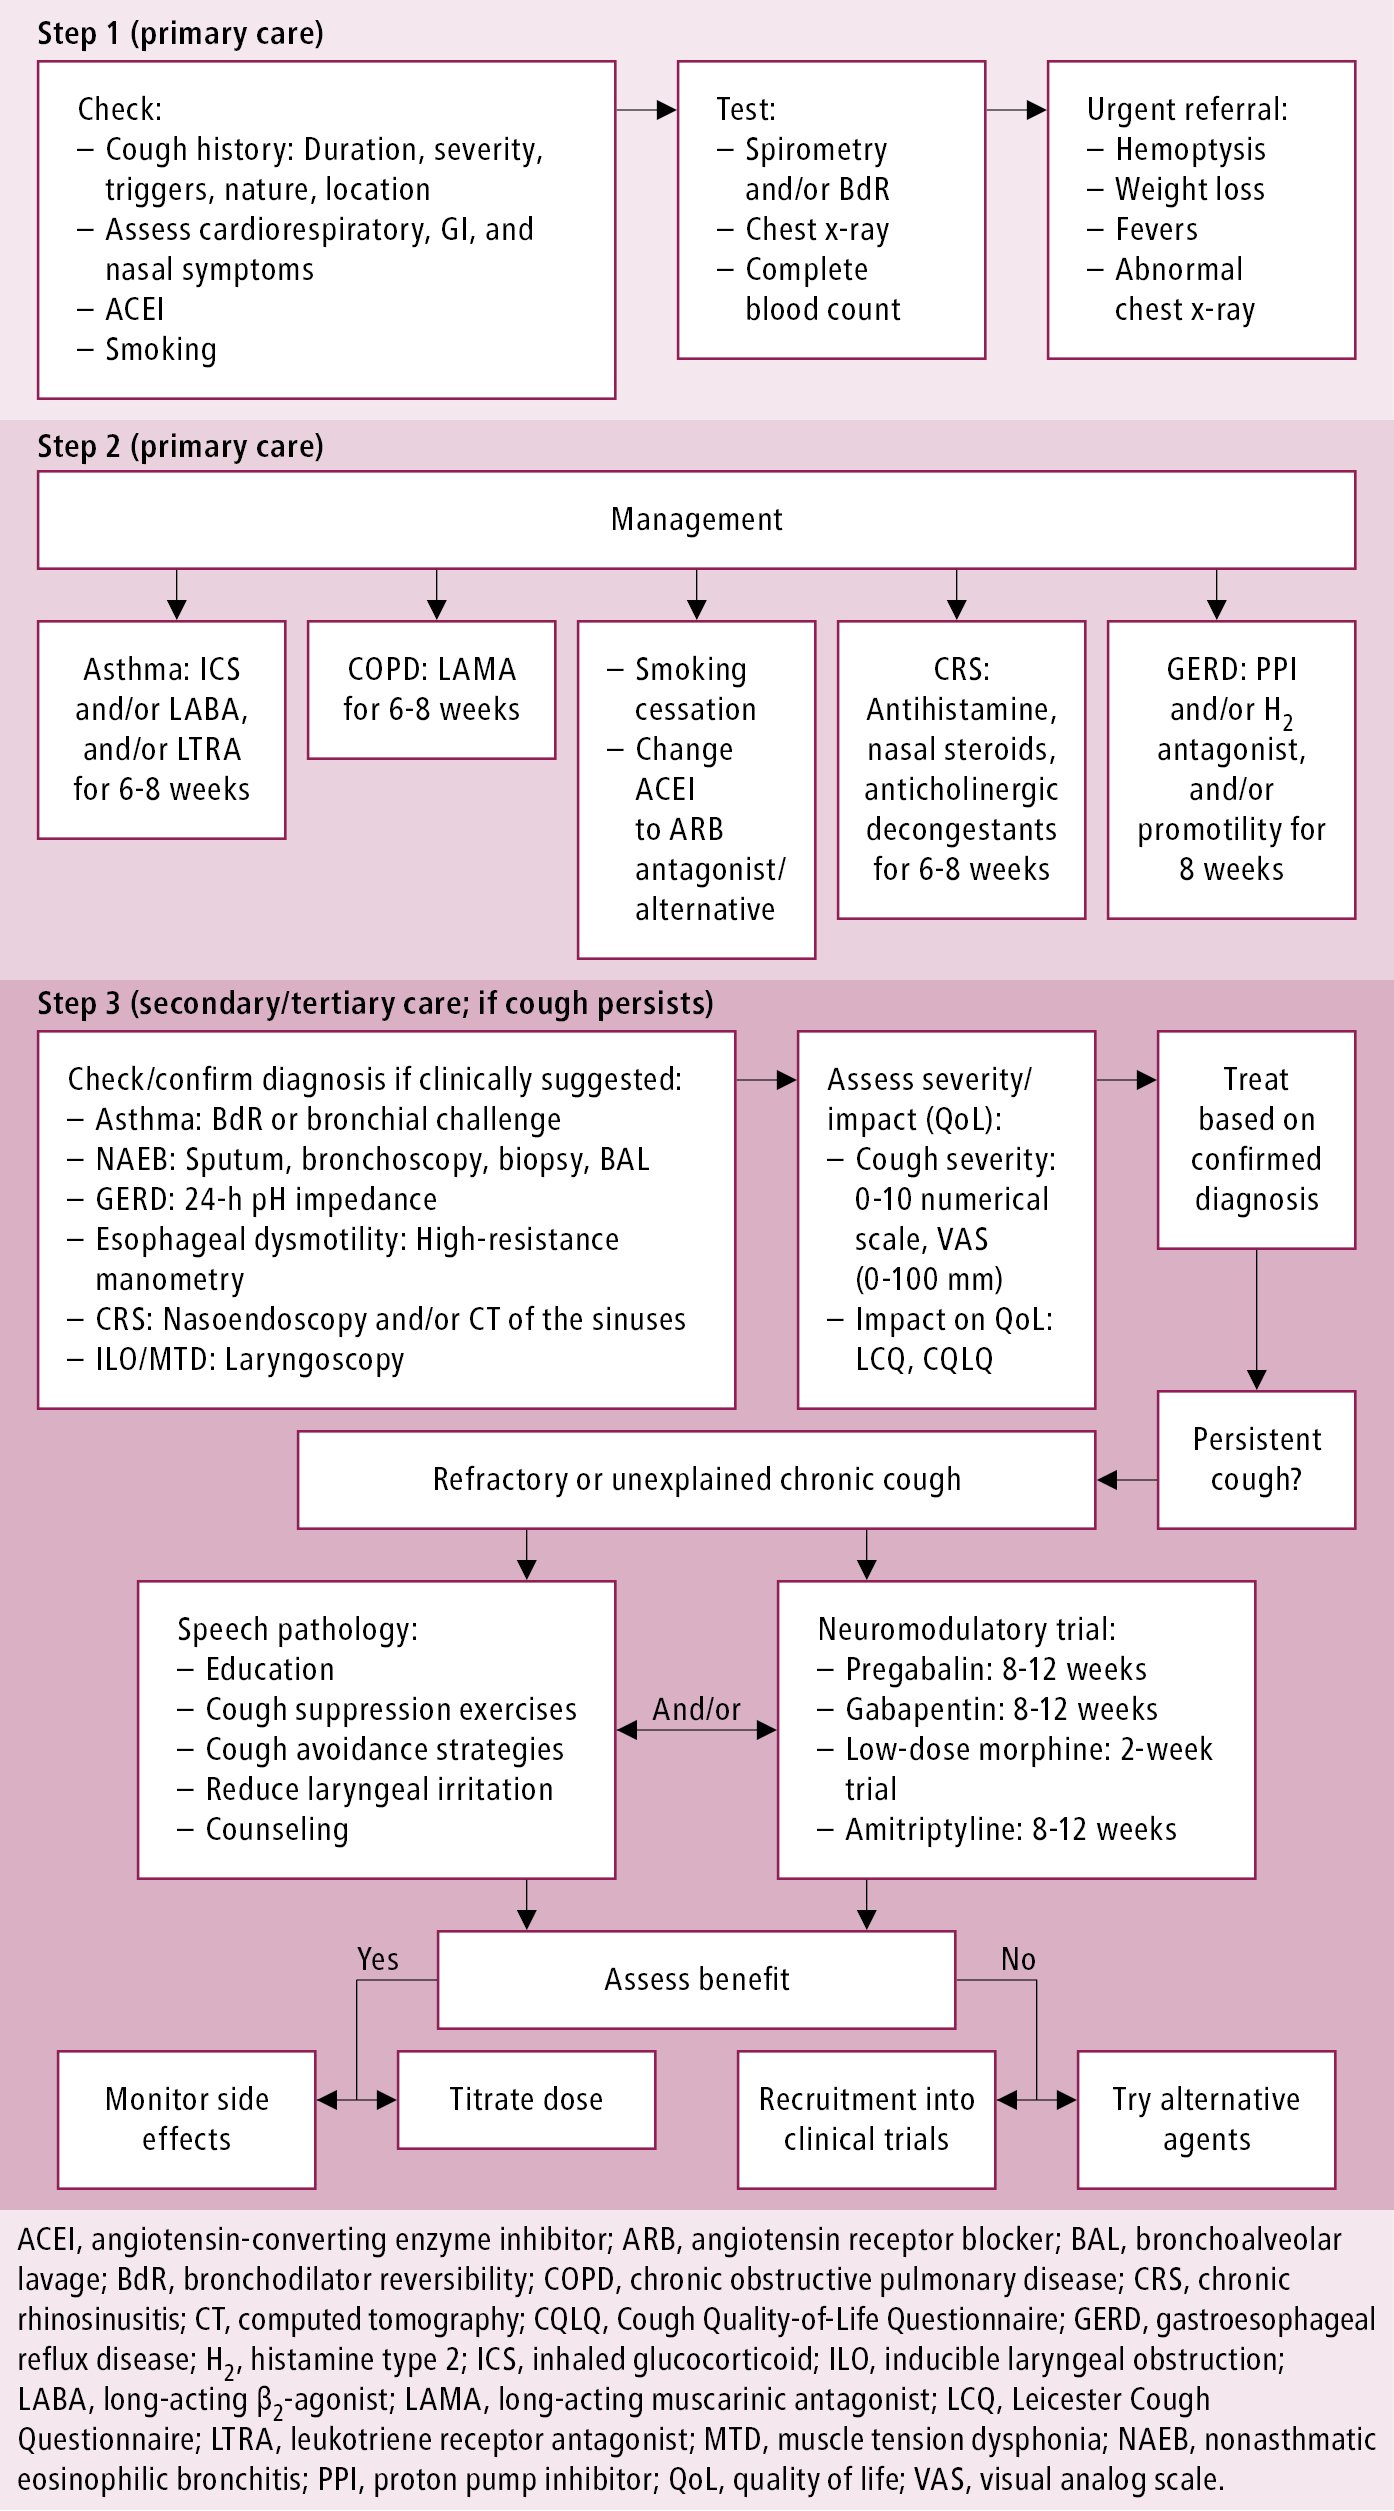 Figure 031_7344.  Stepwise approach to the diagnosis and management of chronic cough in primary and secondary care.  Adapted from  Canadian Journal of Respiratory, Critical Care, and Sleep Medicine. 2021 Sep 23:1-3 .  